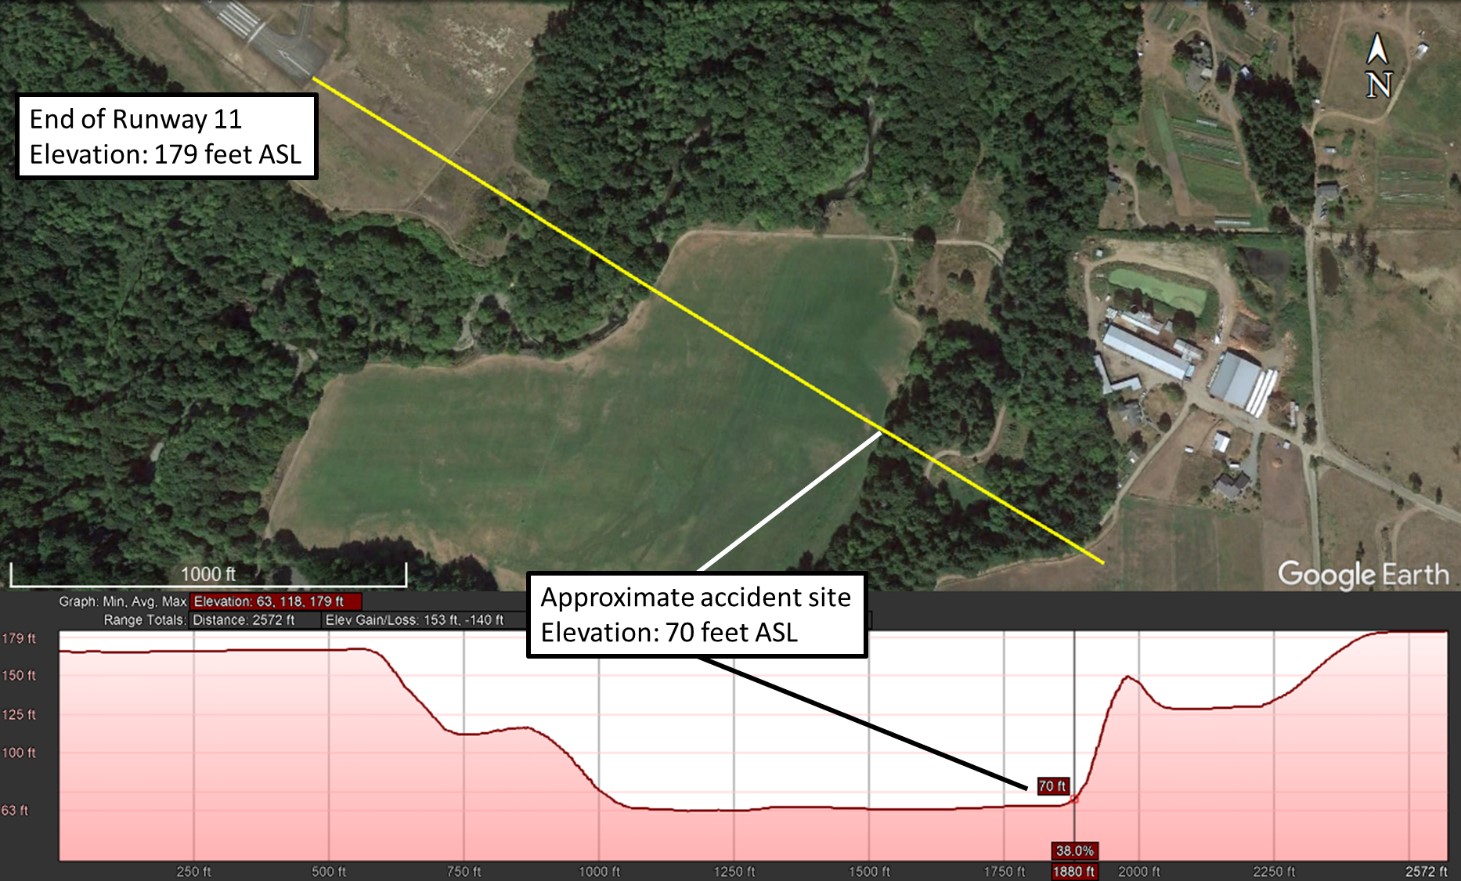 Map showing the approximate accident site and elevation profile between the end of the runway and the field (Source: Google Earth, with TSB annotations)